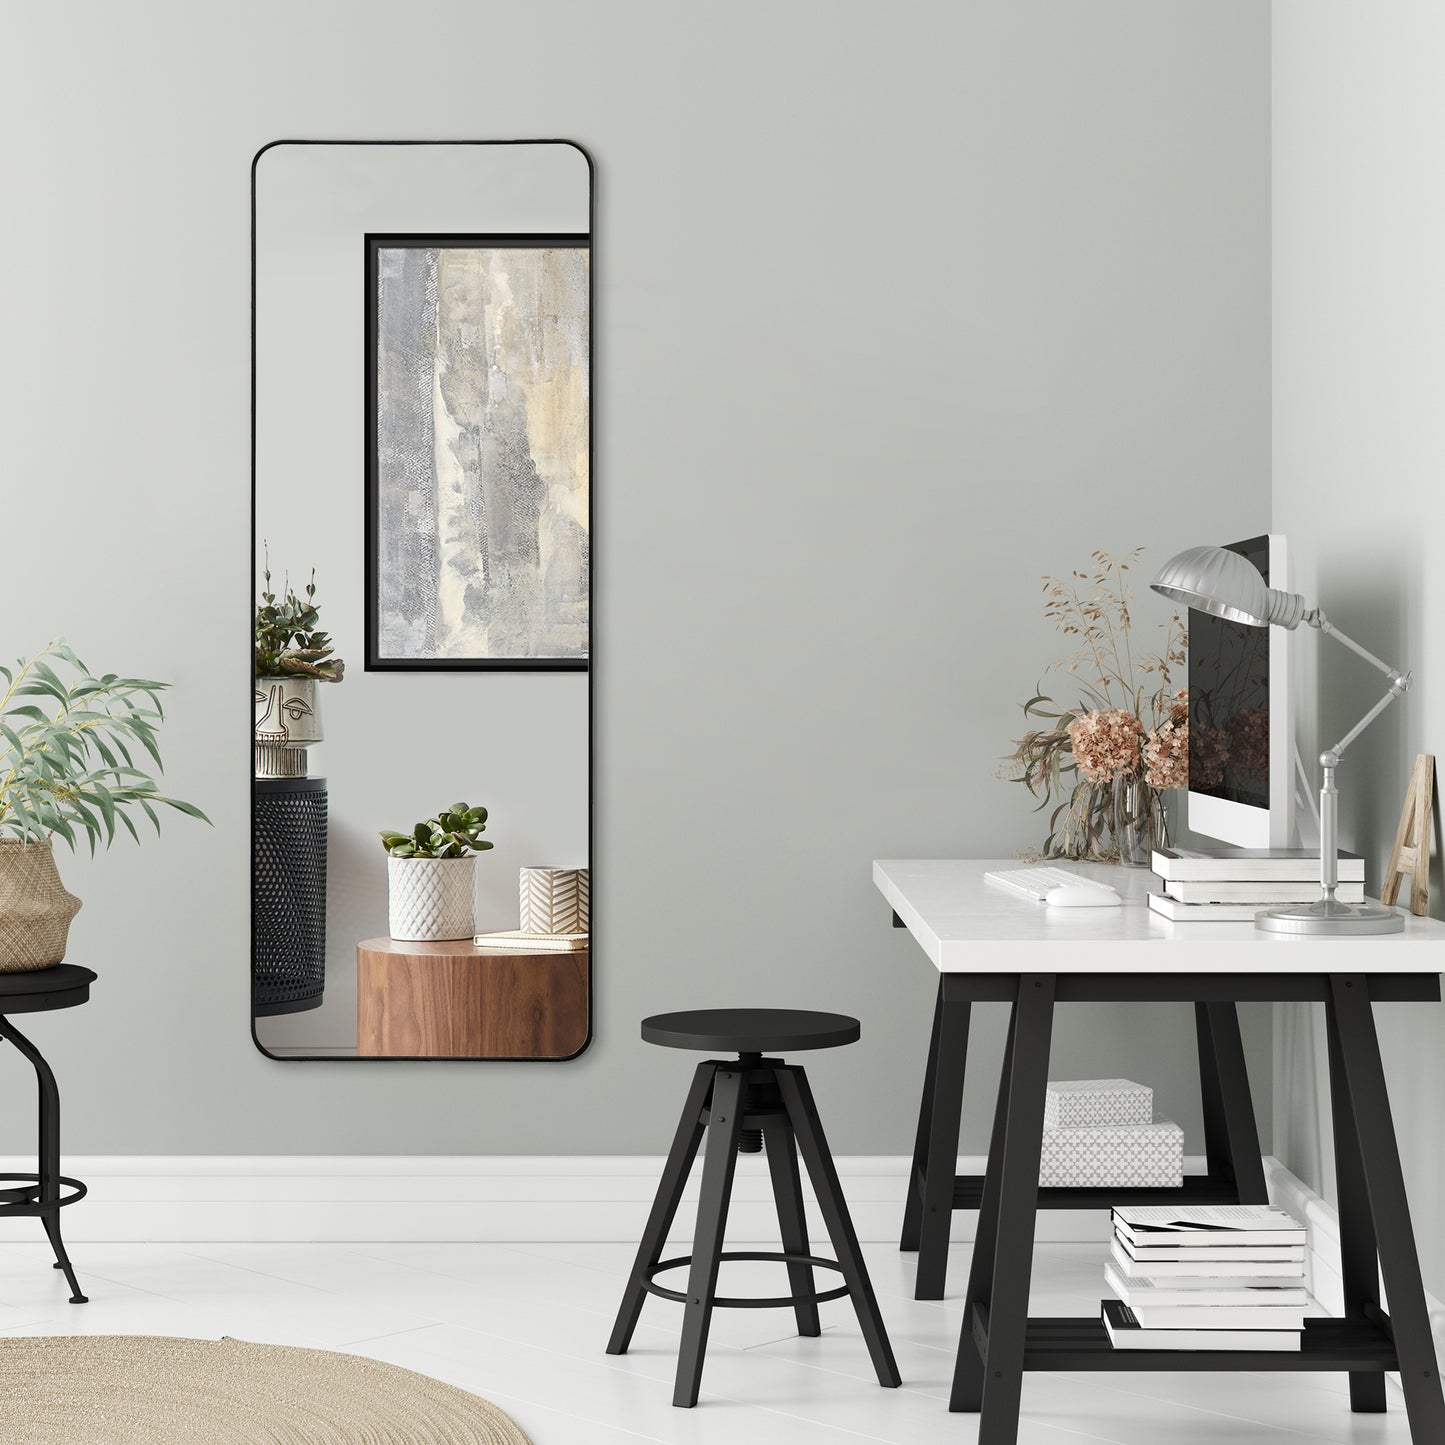 Square Black Frame Mirror with Rounded Corners - Modern Wall Mirror for Bathroom, Bedroom, and Living Room - Framed Mirror with Built-in Hanger